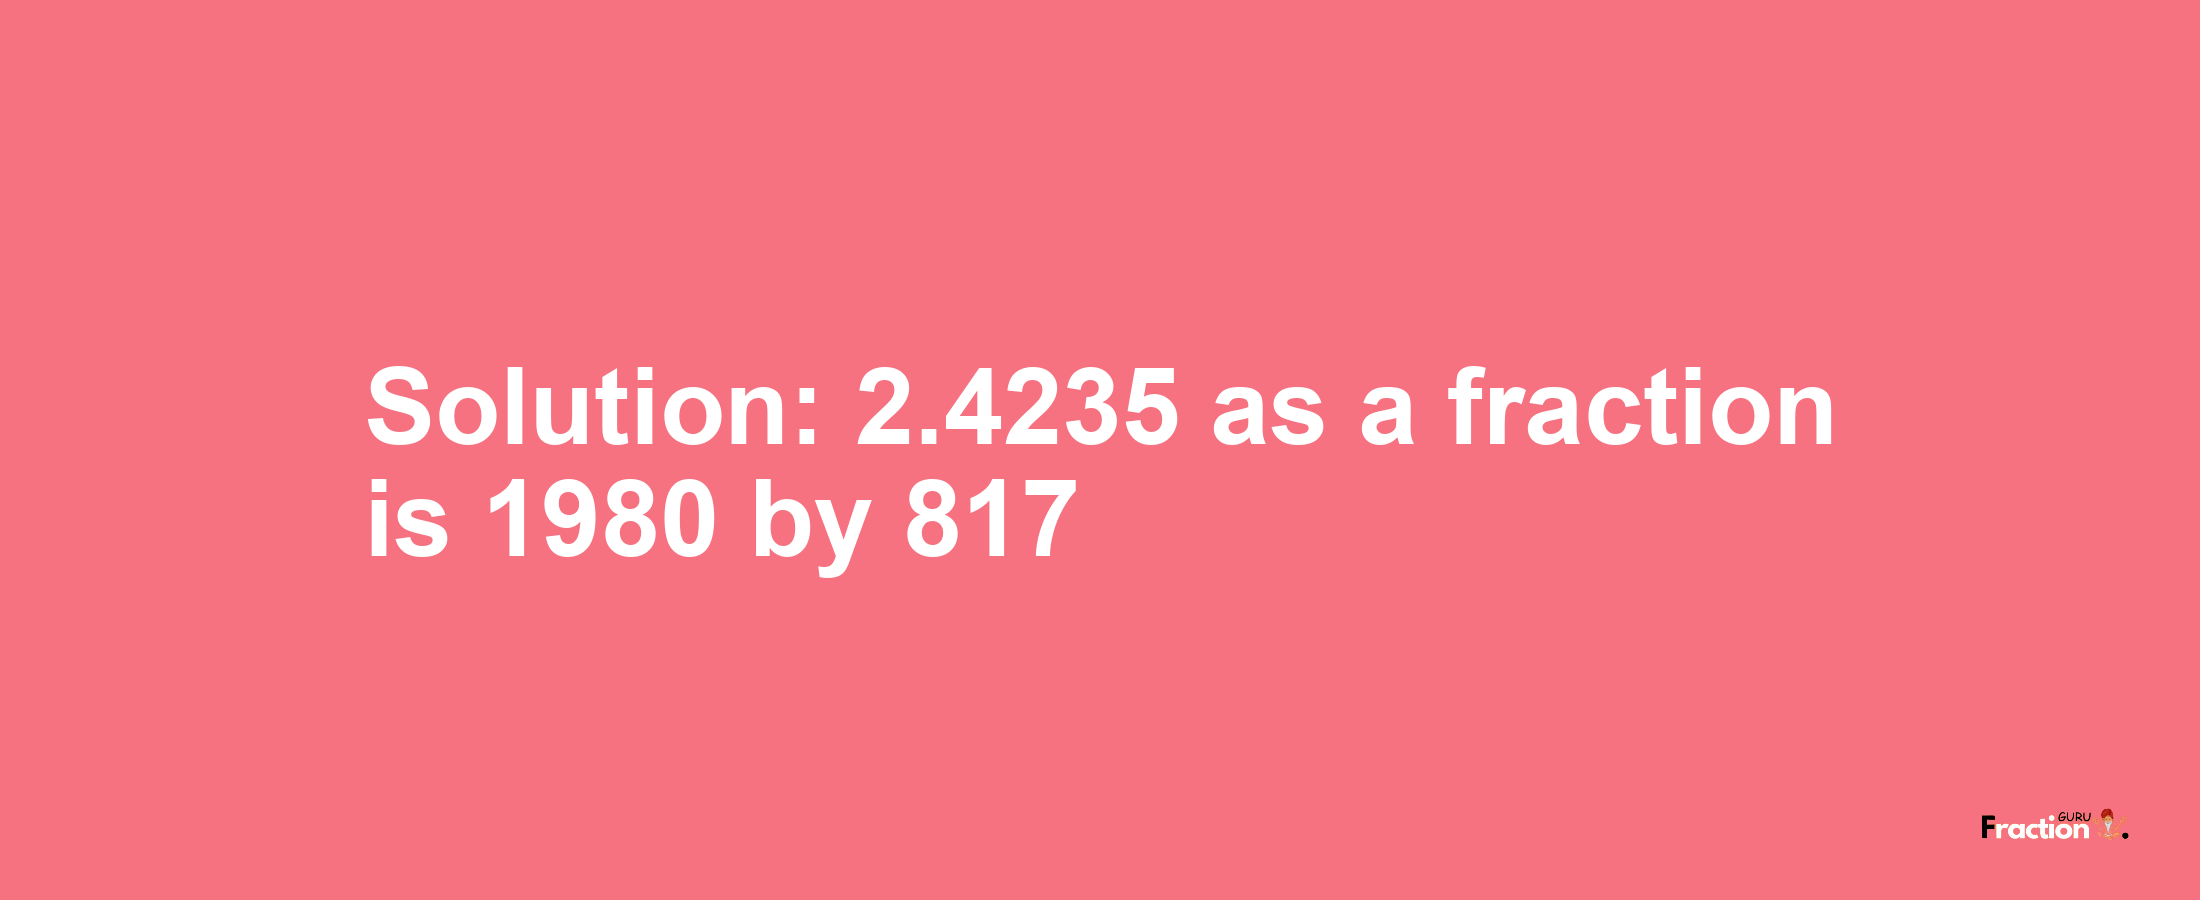 Solution:2.4235 as a fraction is 1980/817